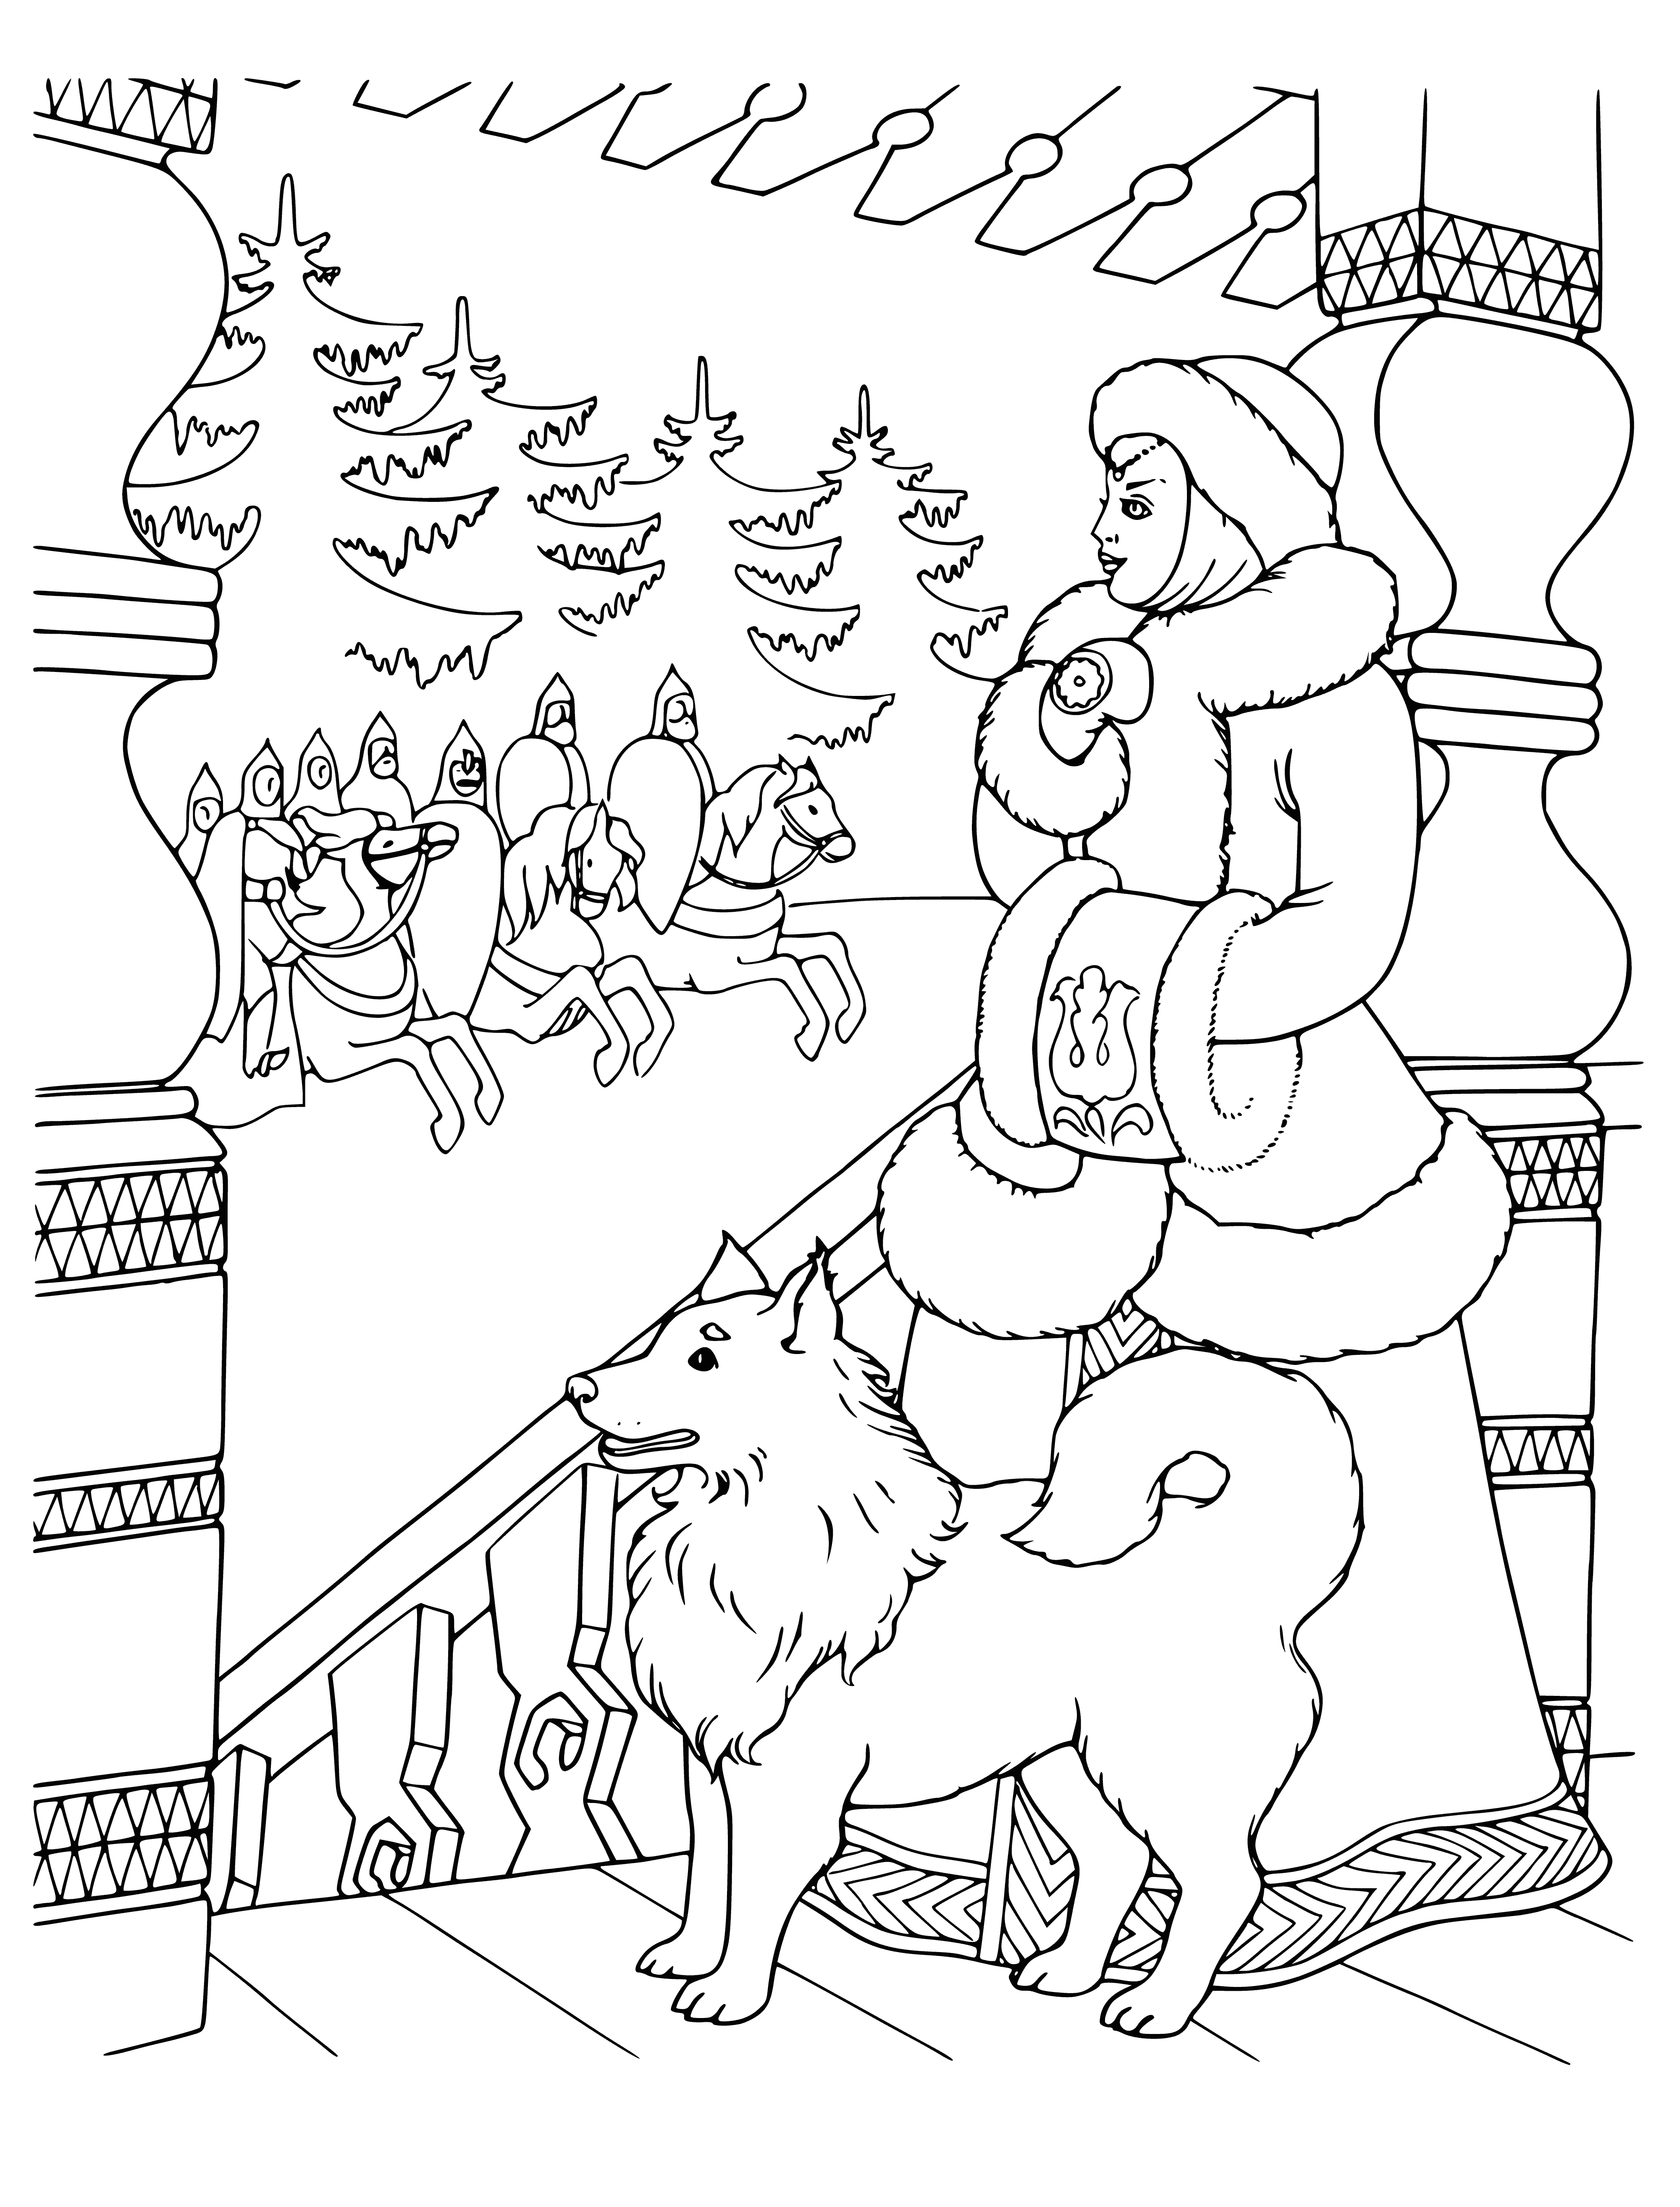 The princess meets the heroic brothers coloring page